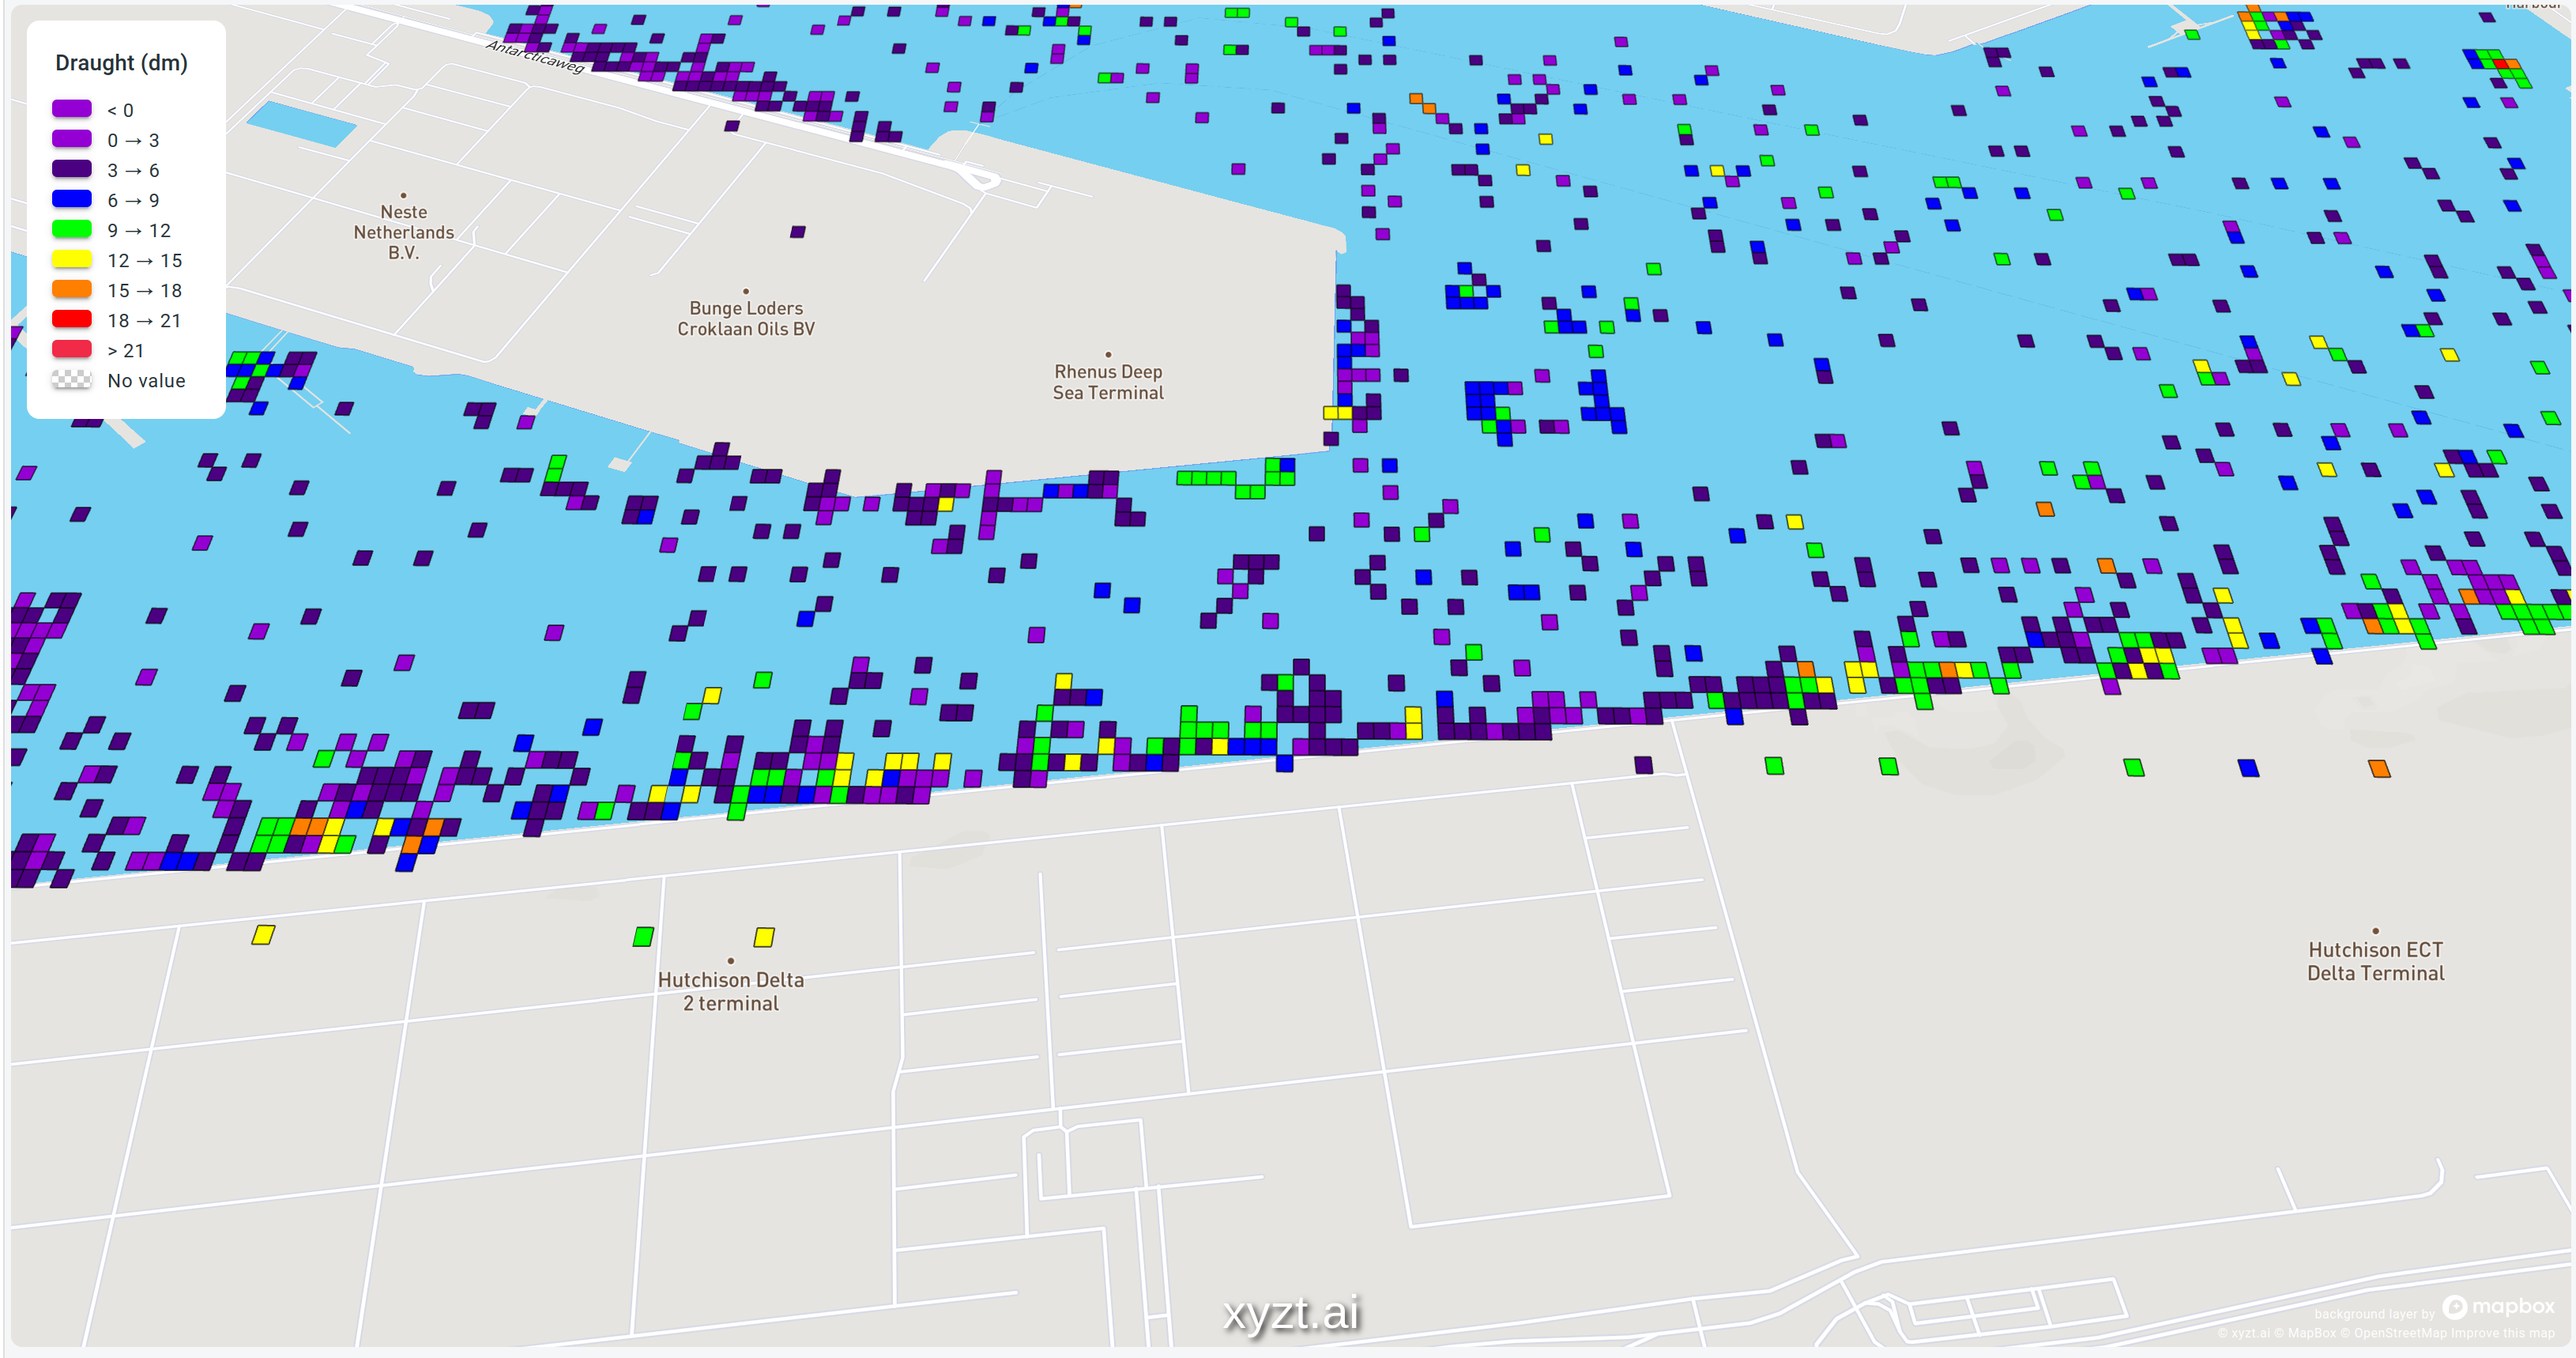 Maritime data in the Port of Rotterdam showing the draught of the vessels using a rainbow color map. Data provided by Spire Maritime and visualized by xyzt.ai.